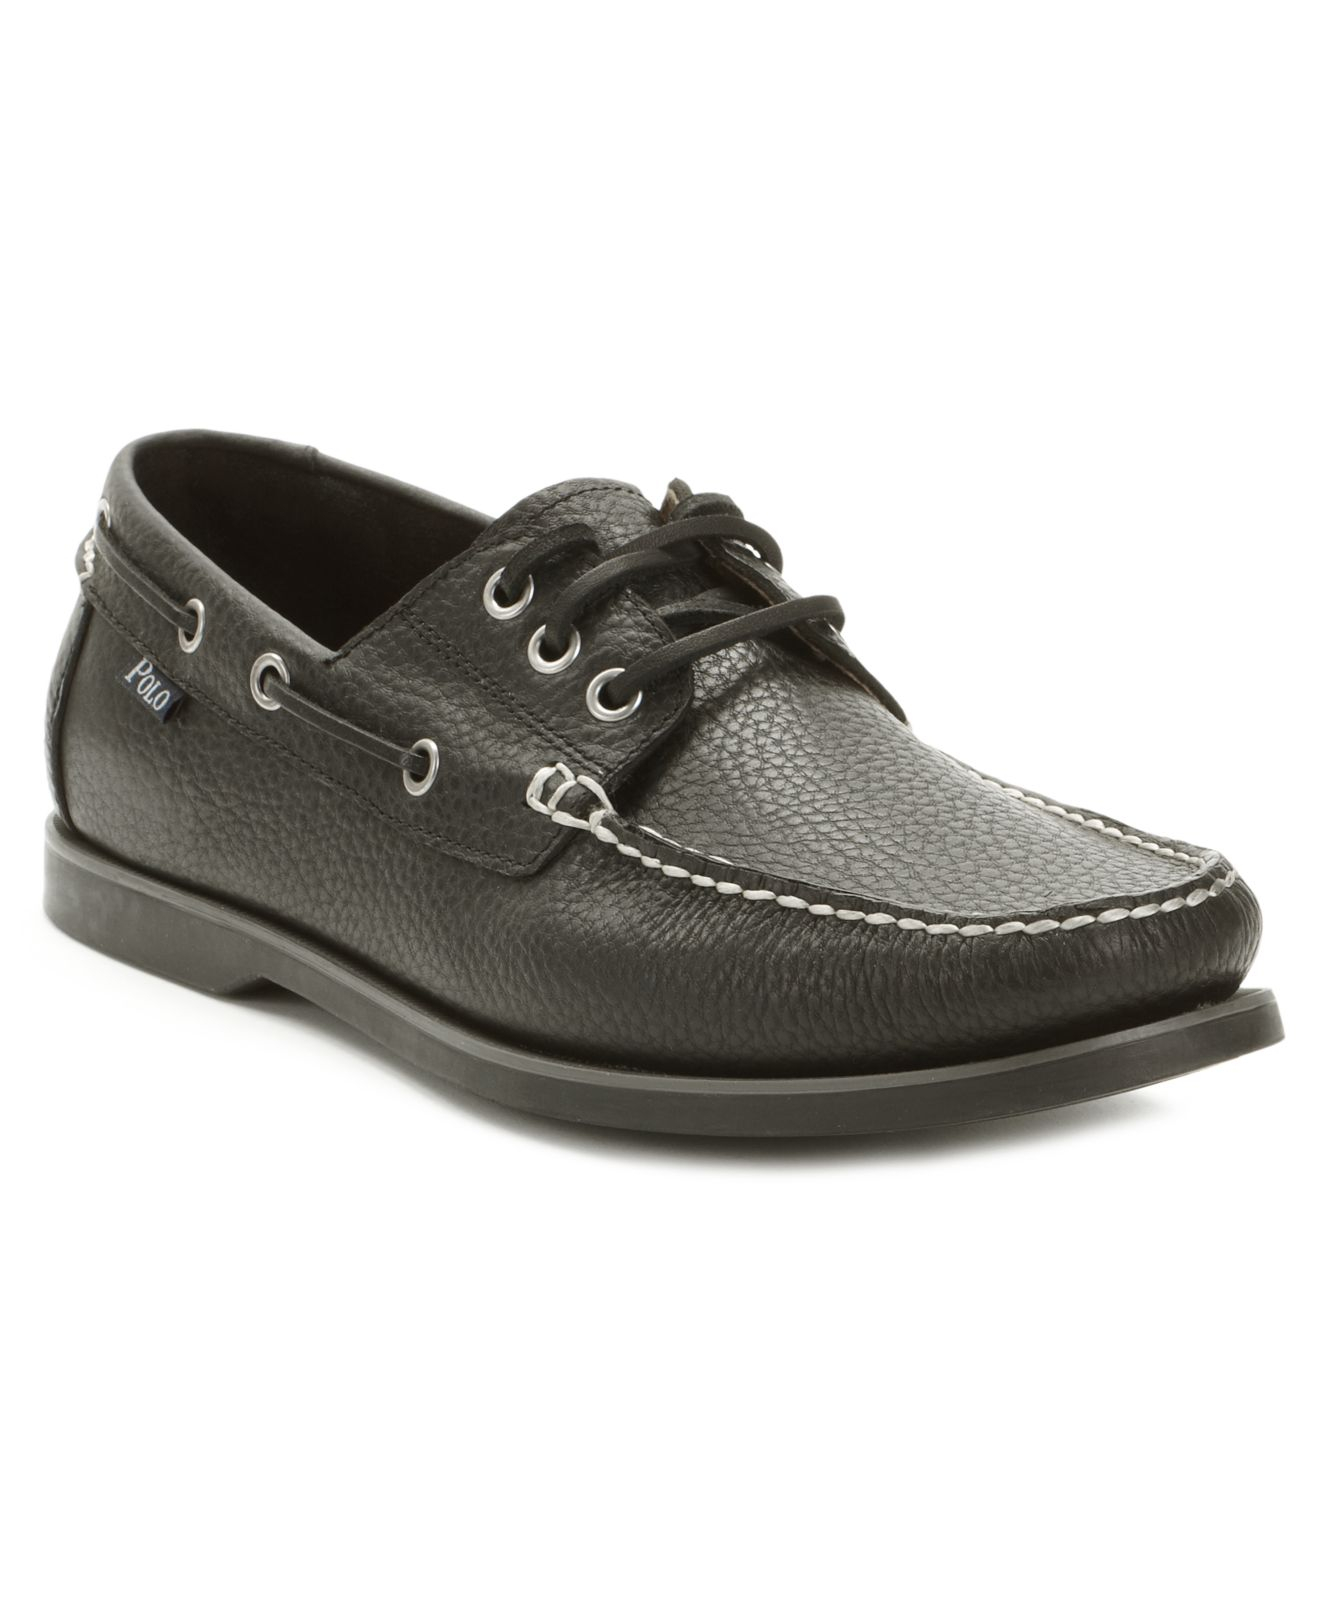 Lyst Polo Ralph Lauren Bienne Tumbled Leather Boat Shoes